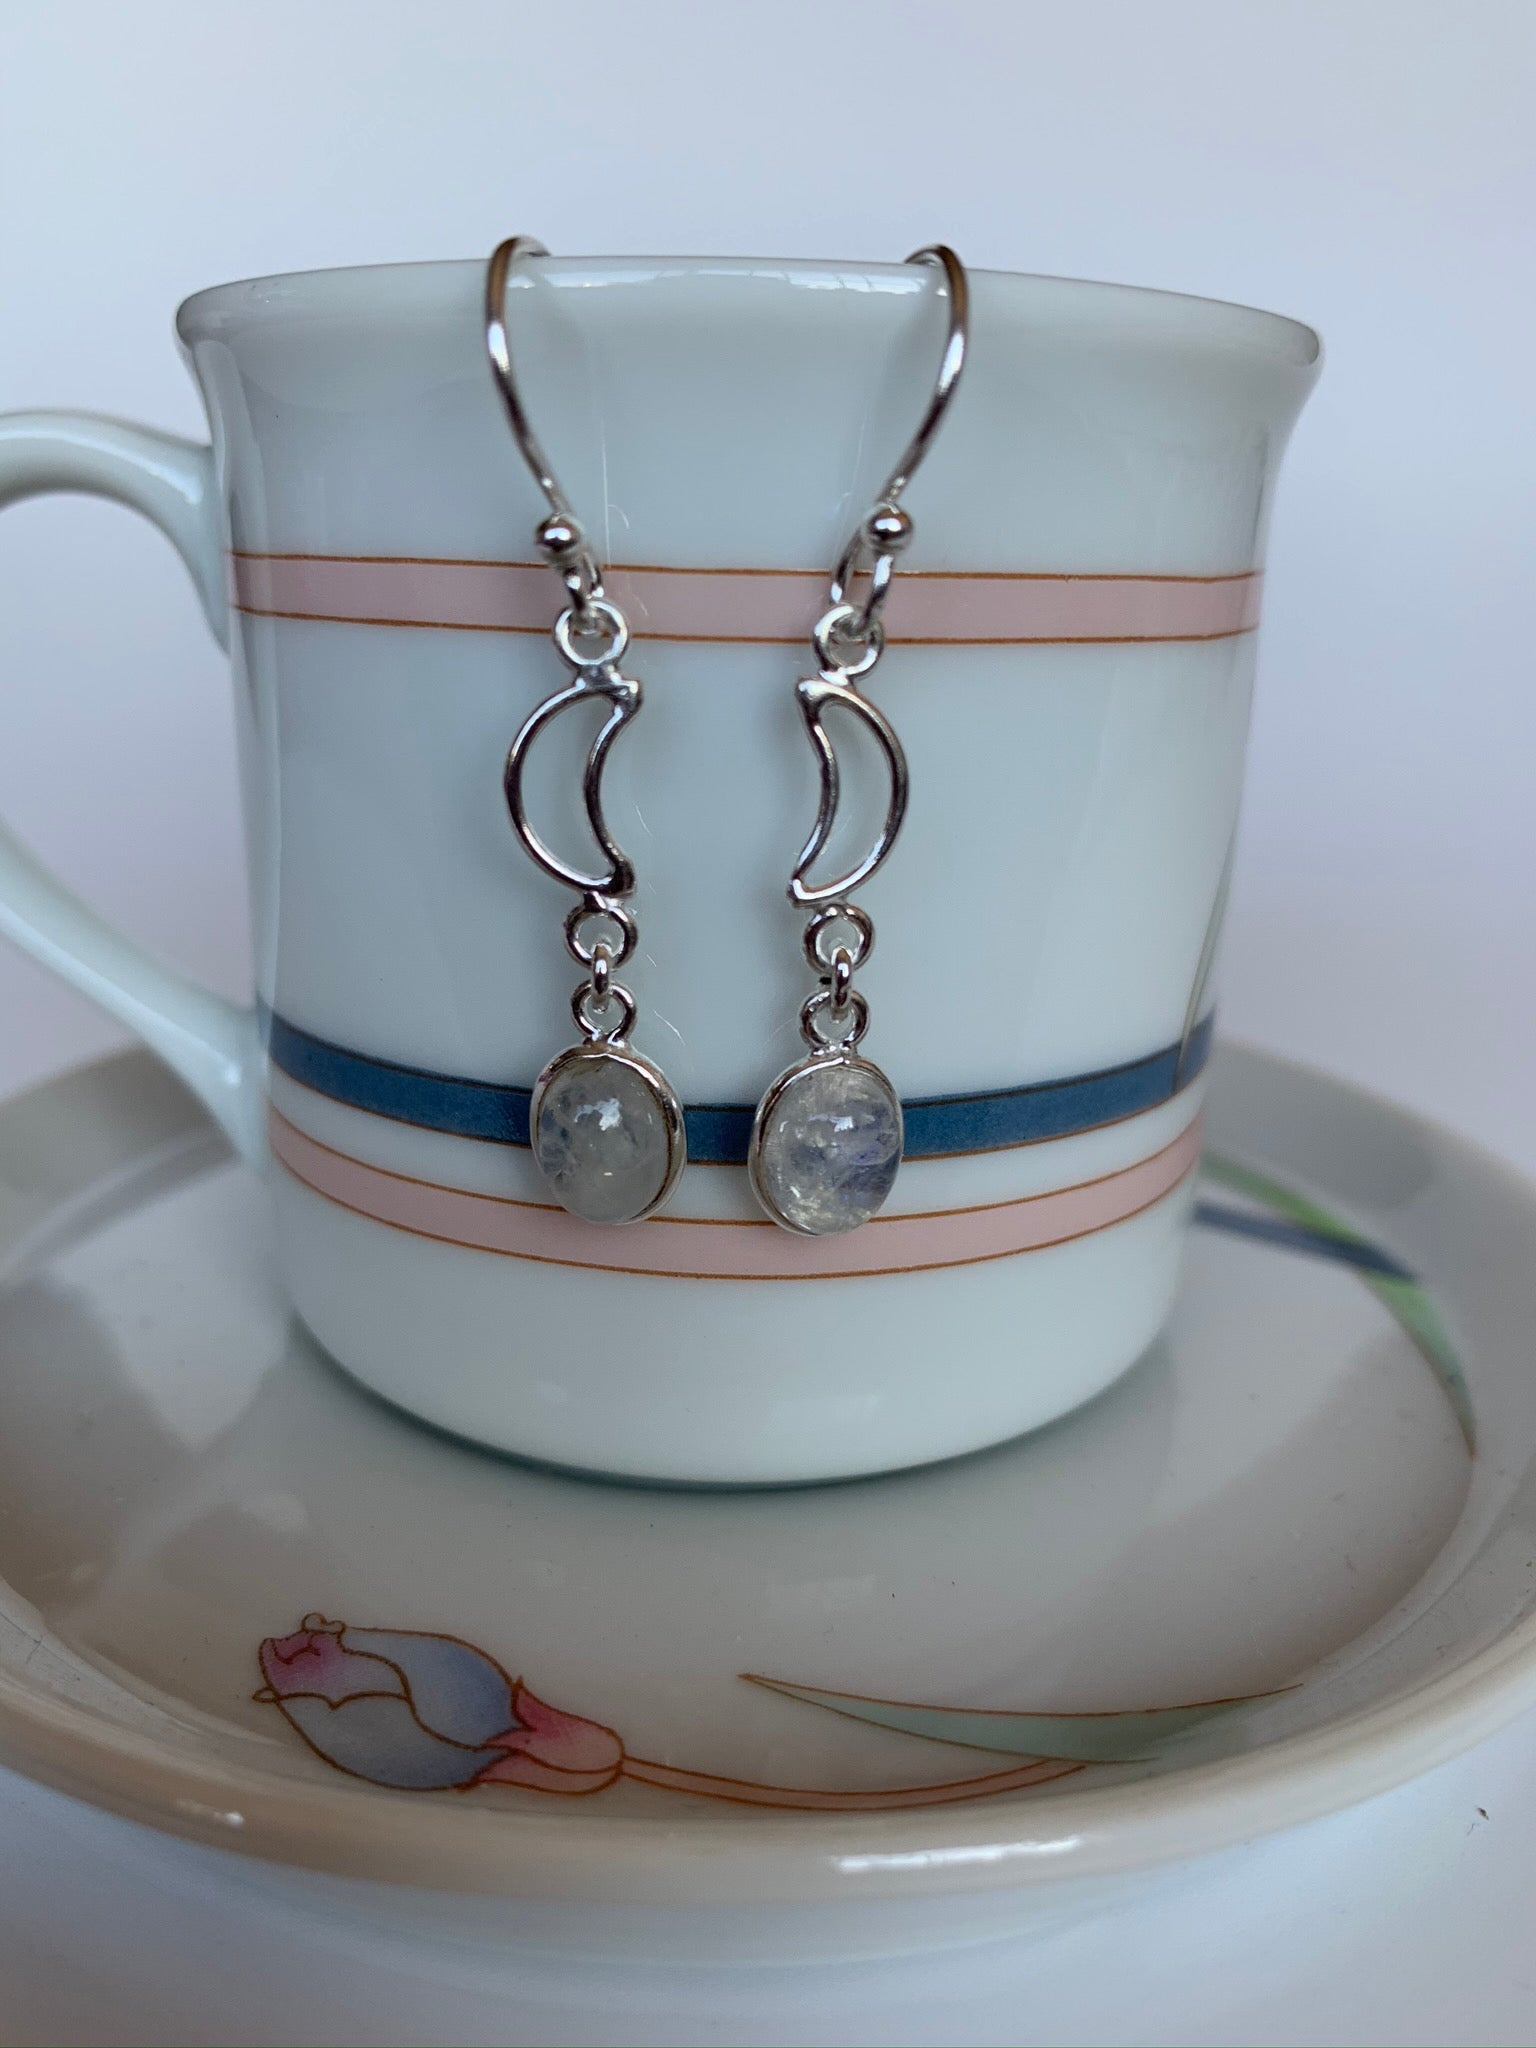 Delicate sterling silver earrings with small open crescent moon and dangling round moonstone set in sterling. These are lightweight and approximately 1½" long. Earrings have wires, not posts for wearing.